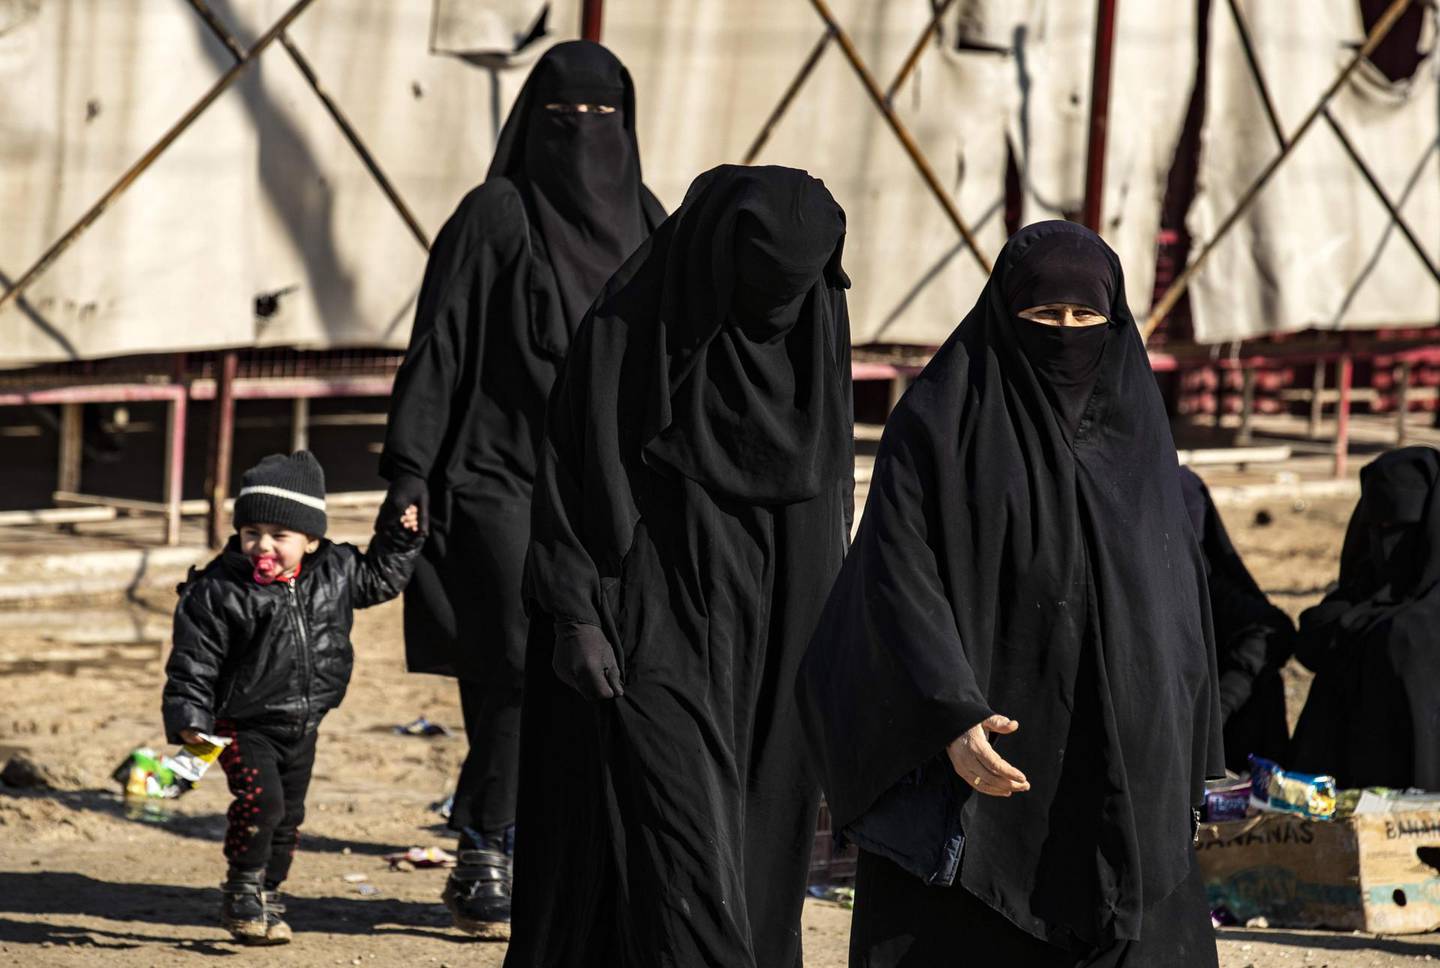 Women walk inside the Kurdish-run al-Hol camp in the al-Hasakeh governorate in northeastern Syria on January 25, 2020, where families of Islamic State (IS) foreign fighters are held.  / AFP / Delil SOULEIMAN
